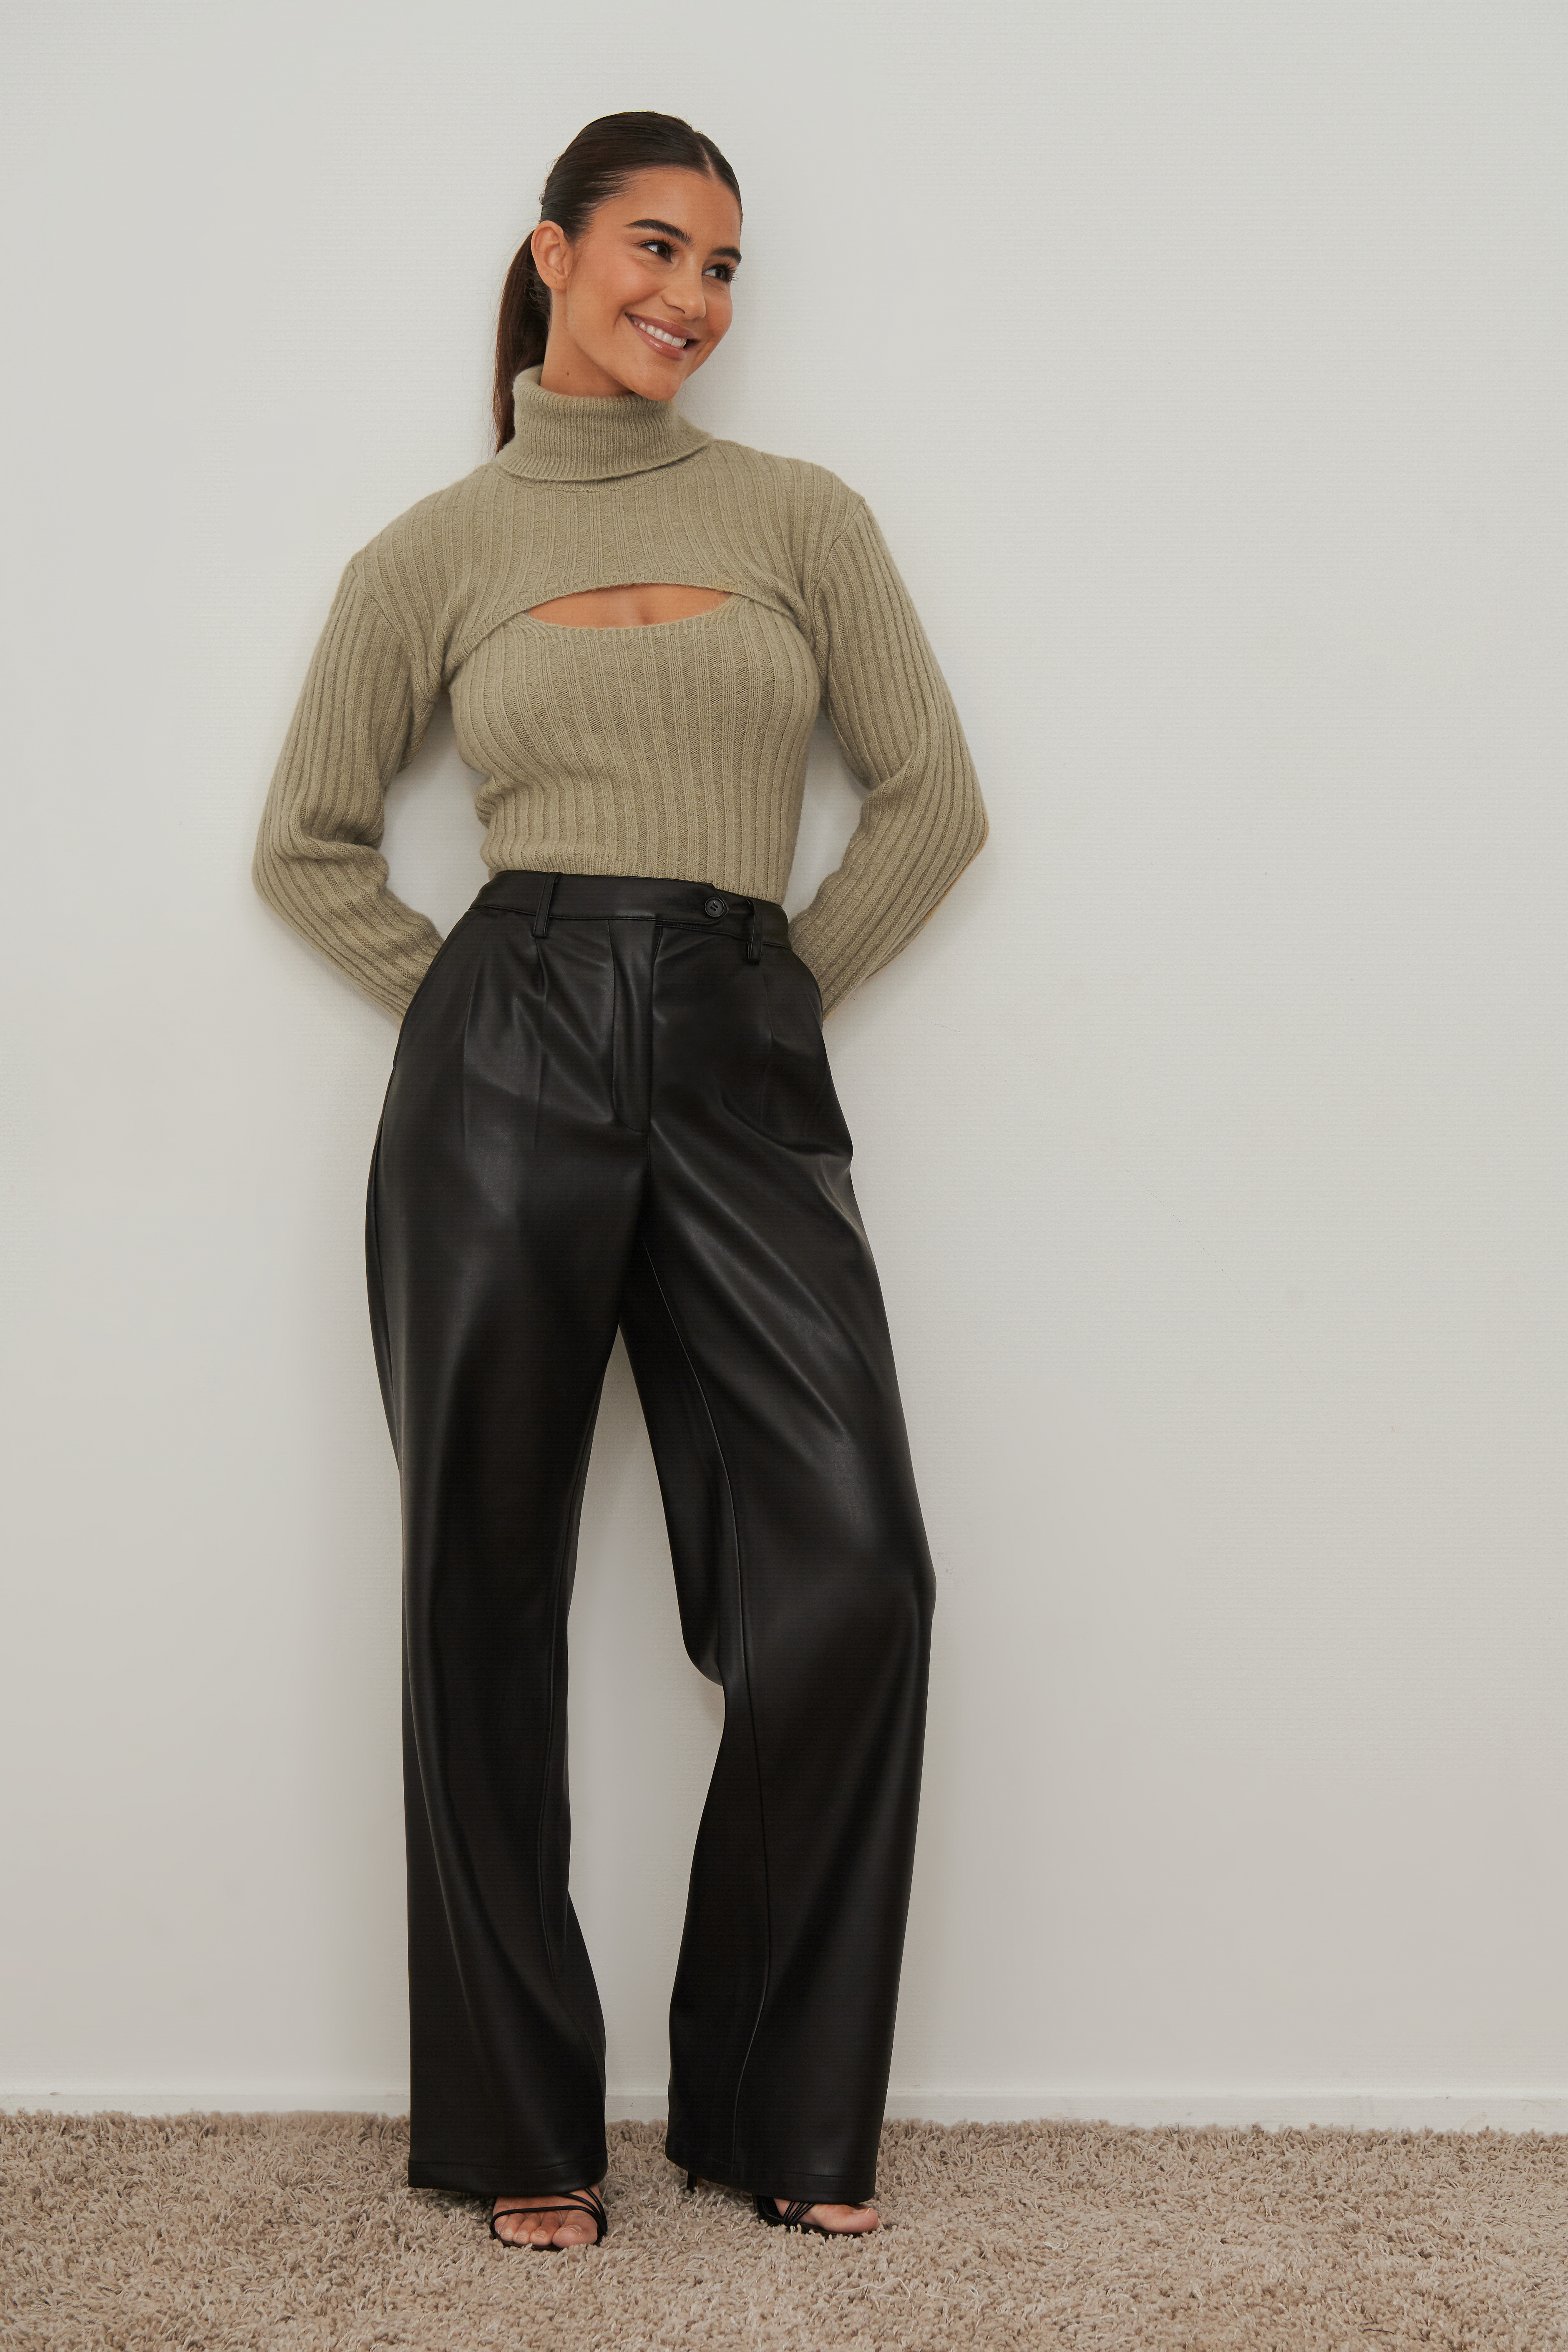 Bolero Knitted Turtle Neck Outfit.